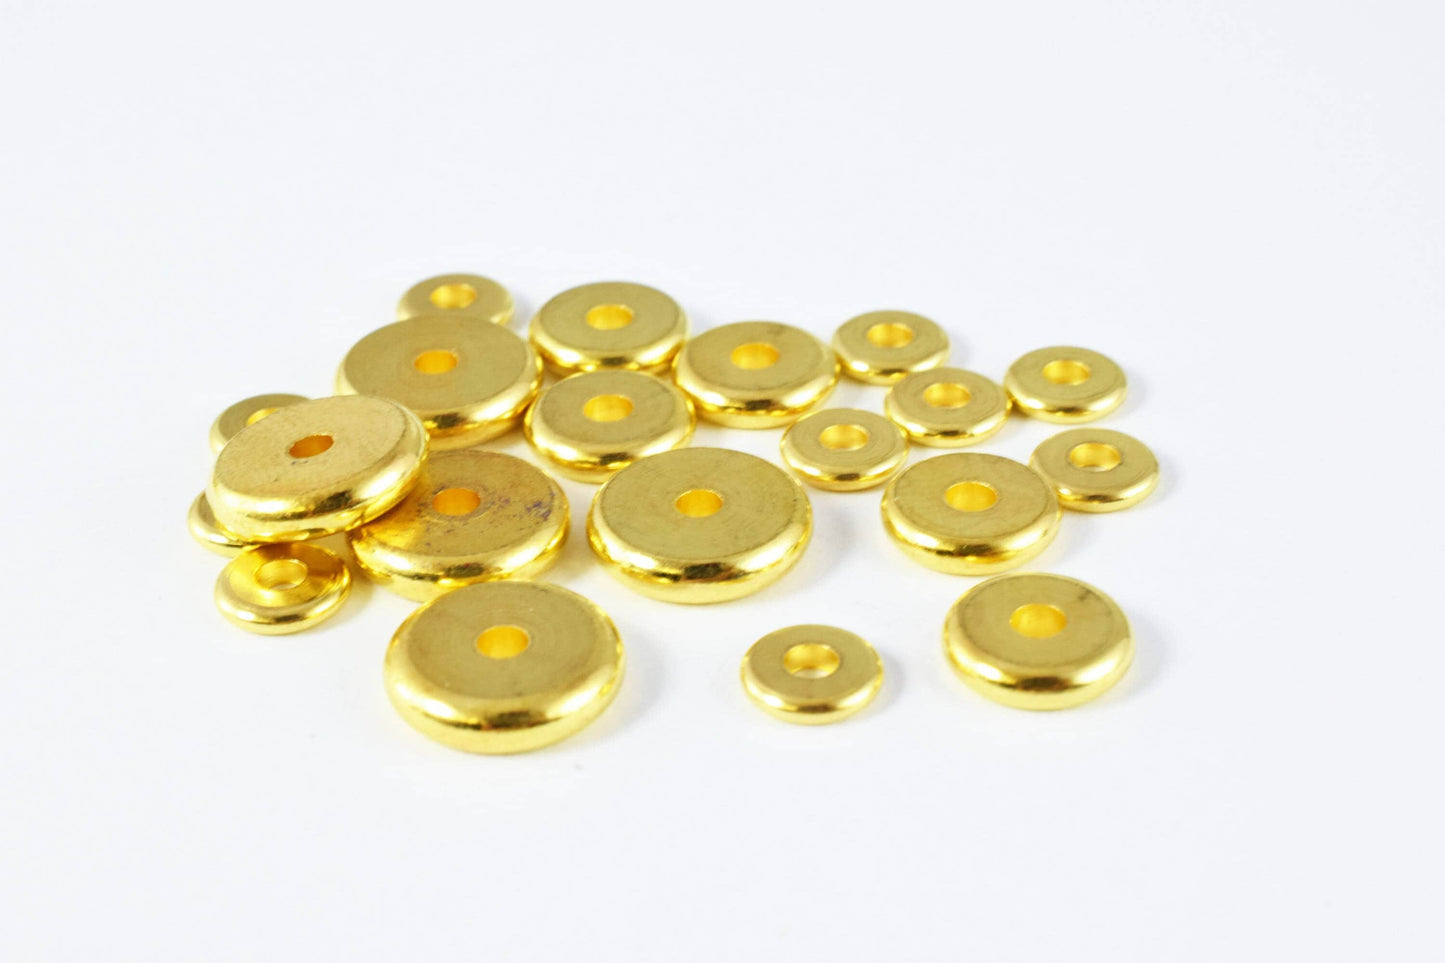 Gold /silver roundel plain spacer size 6mm/8mm/10mm, spacer beads for jewelry making,craft supplies, tools,beads,cabochons,beads,gold,